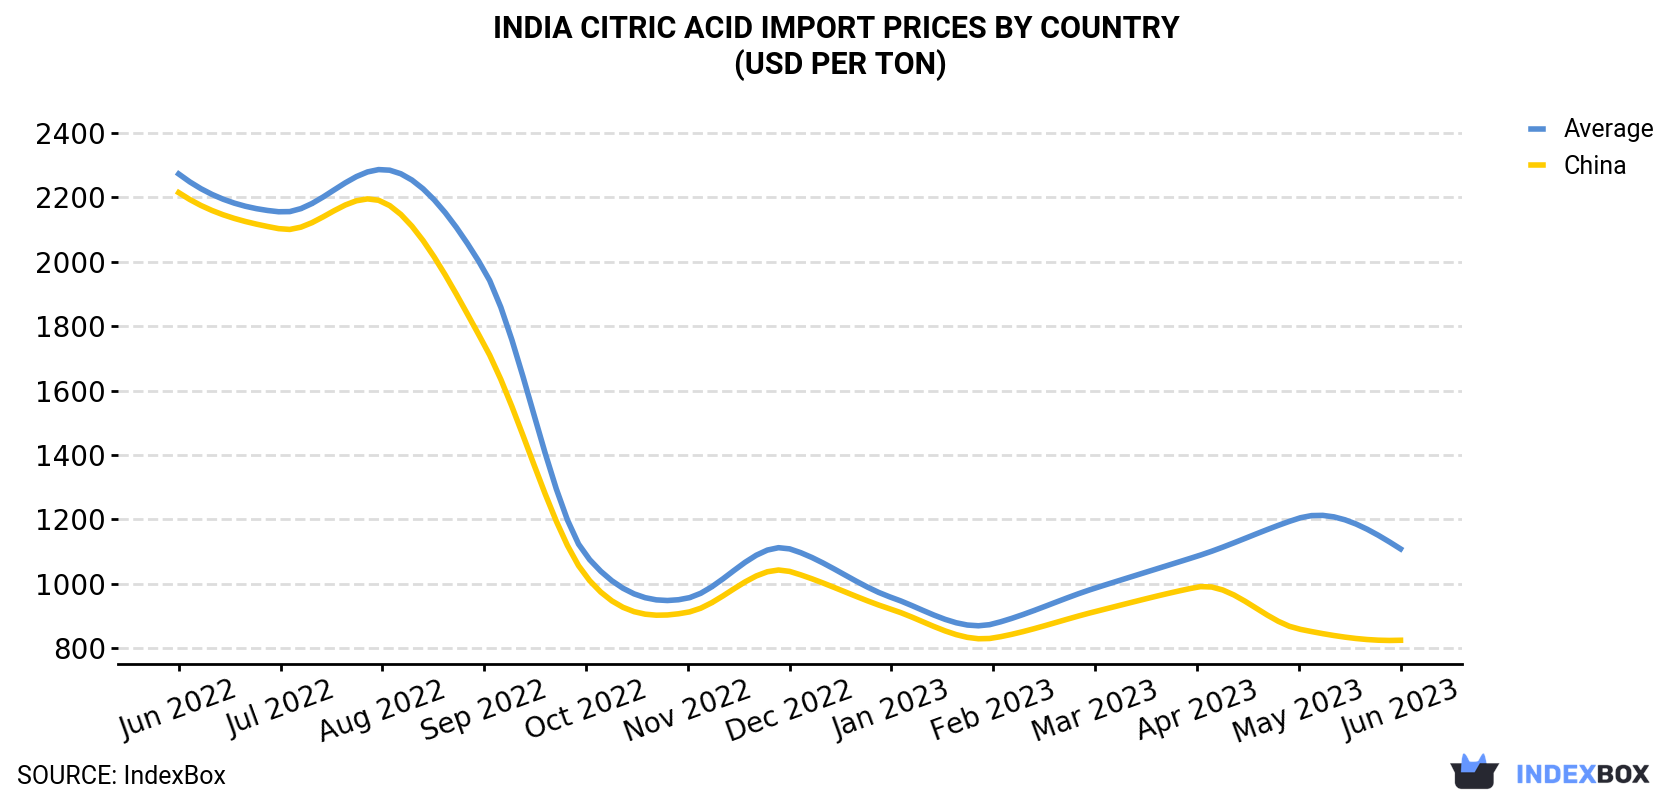 India Citric Acid Import Prices By Country (USD Per Ton)